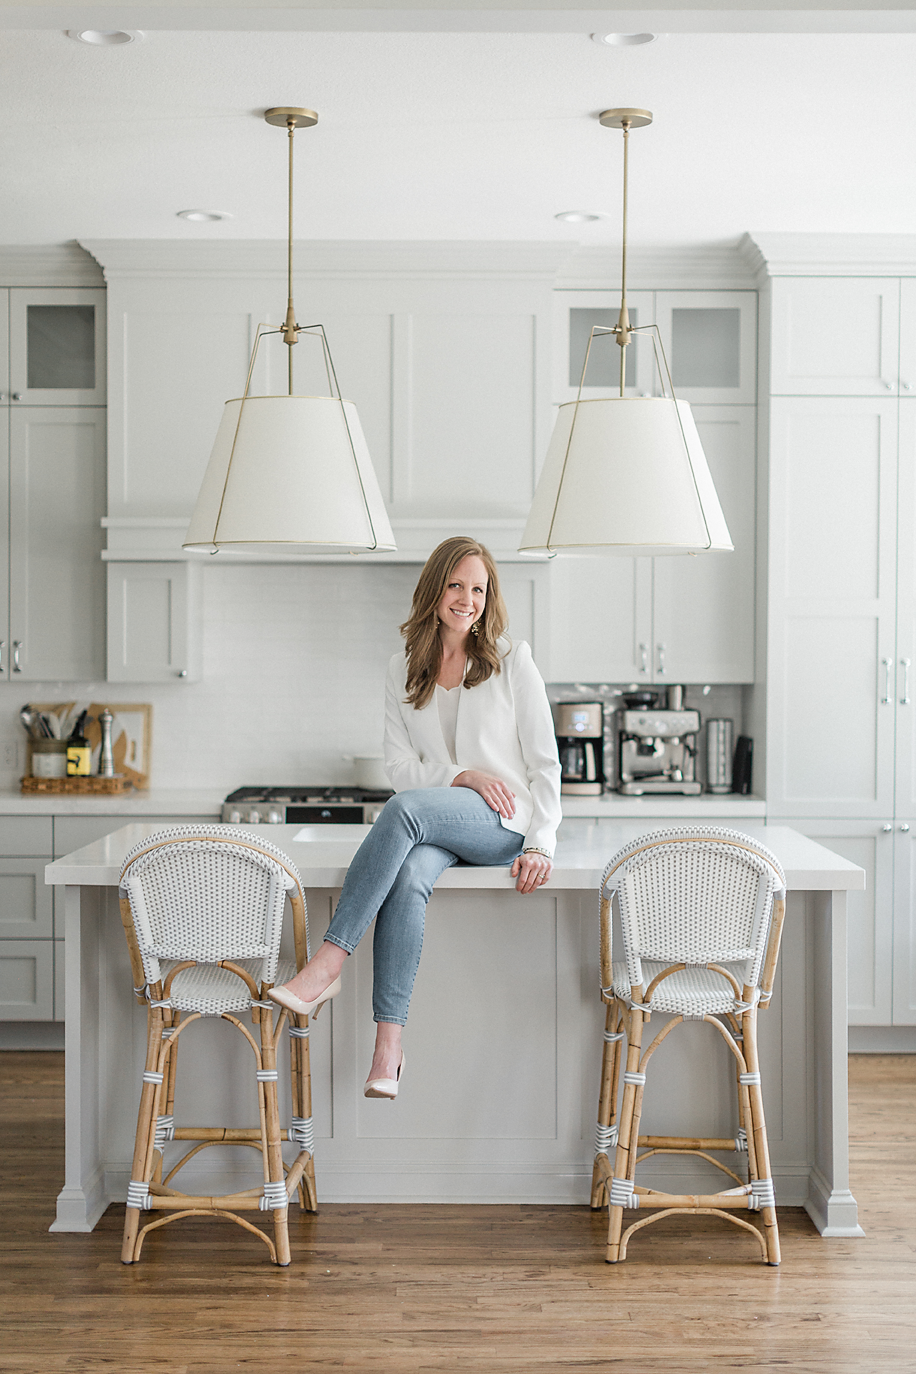 Professional headshot photo of a Dallas Texas business woman posing on a kitchen island counter of a beautifully designed kitchen as she smiles at the camera for her branding/headshot session.